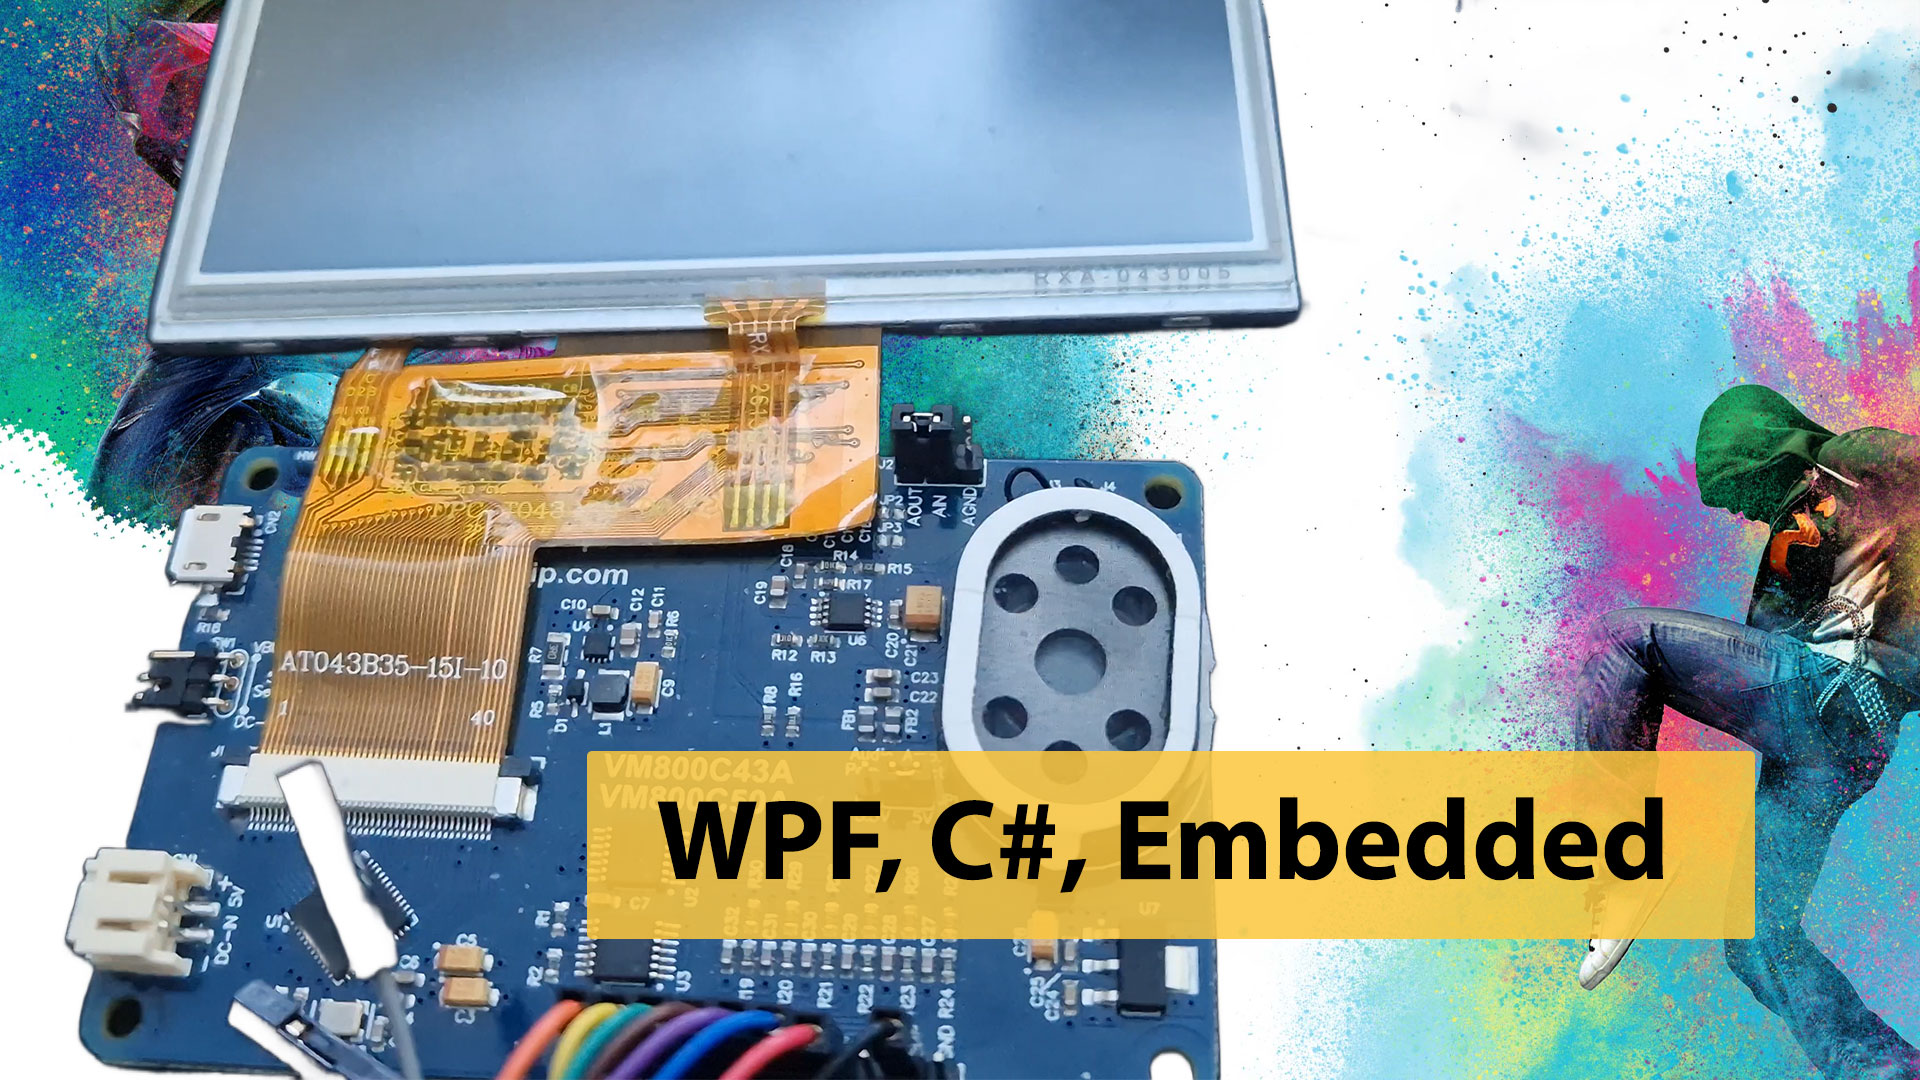 WPF, C#, Embedded, Electronică